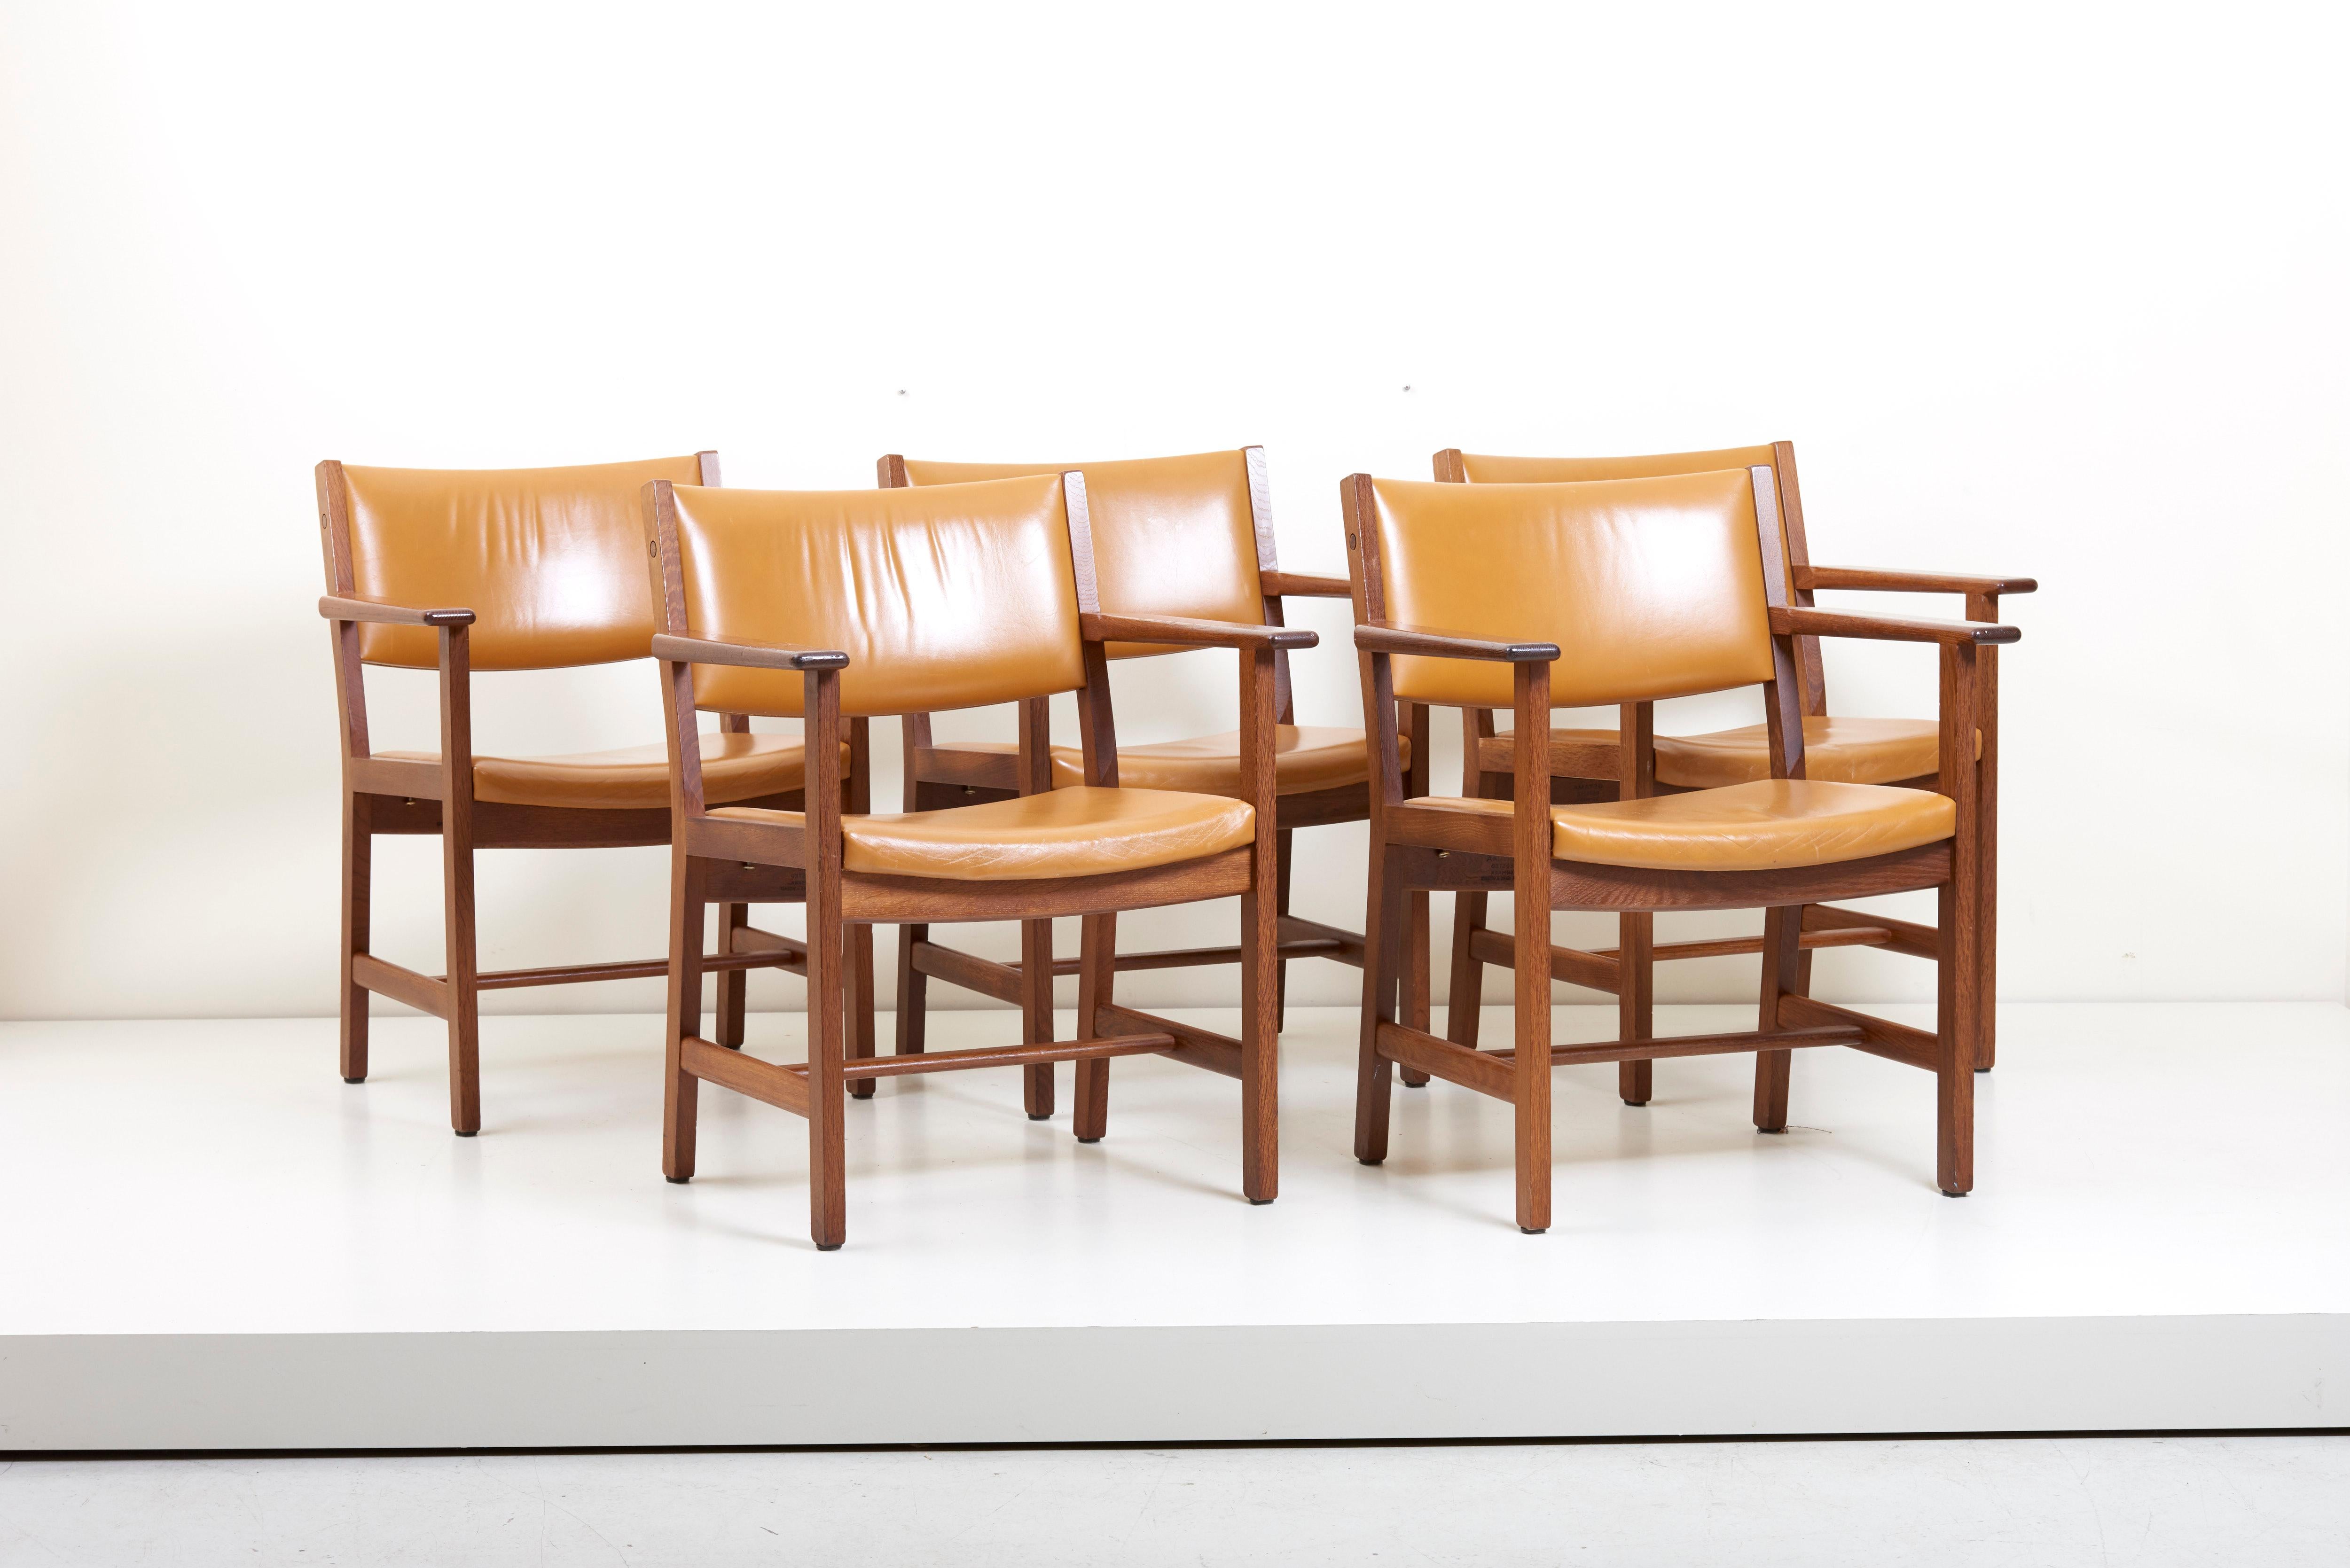 20th Century Set of Ten GE 1960s Armchairs in Leather by Hans Wegner for by GETAMA, Denmark